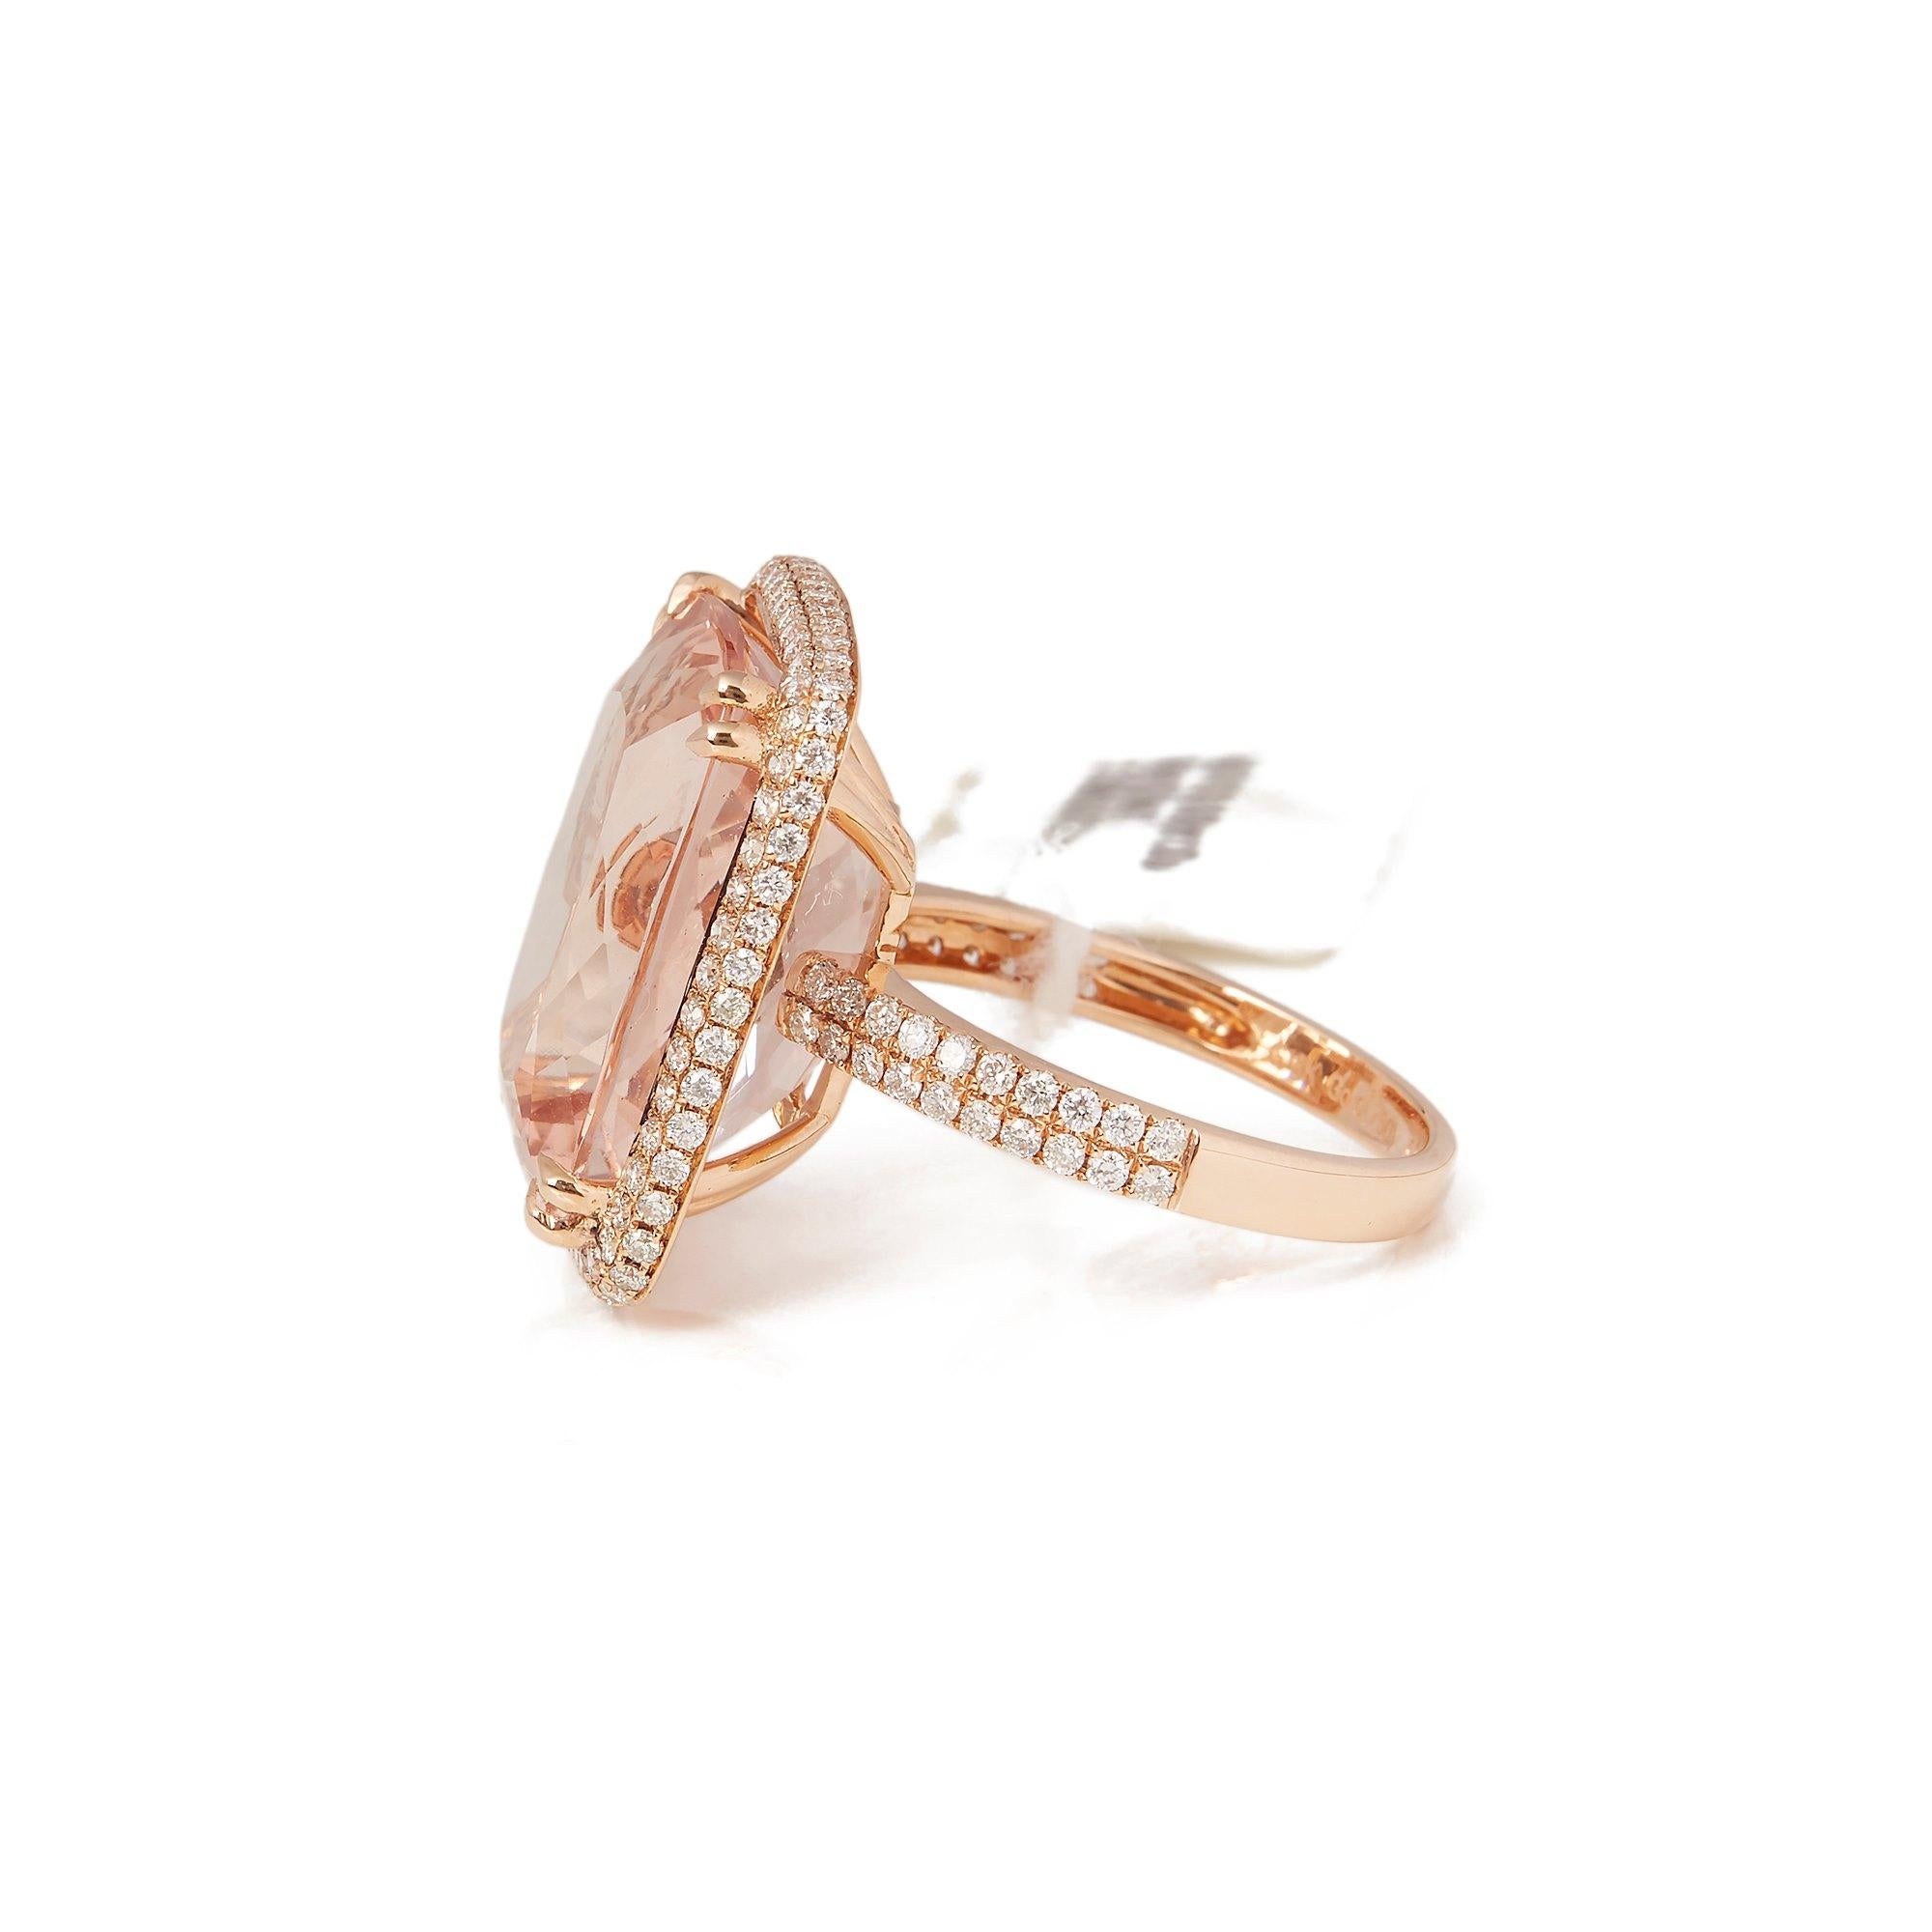 Contemporary Certified 16.71ct Cushion Cut Brazilian Morganite and Diamond 18ct Gold Ring For Sale